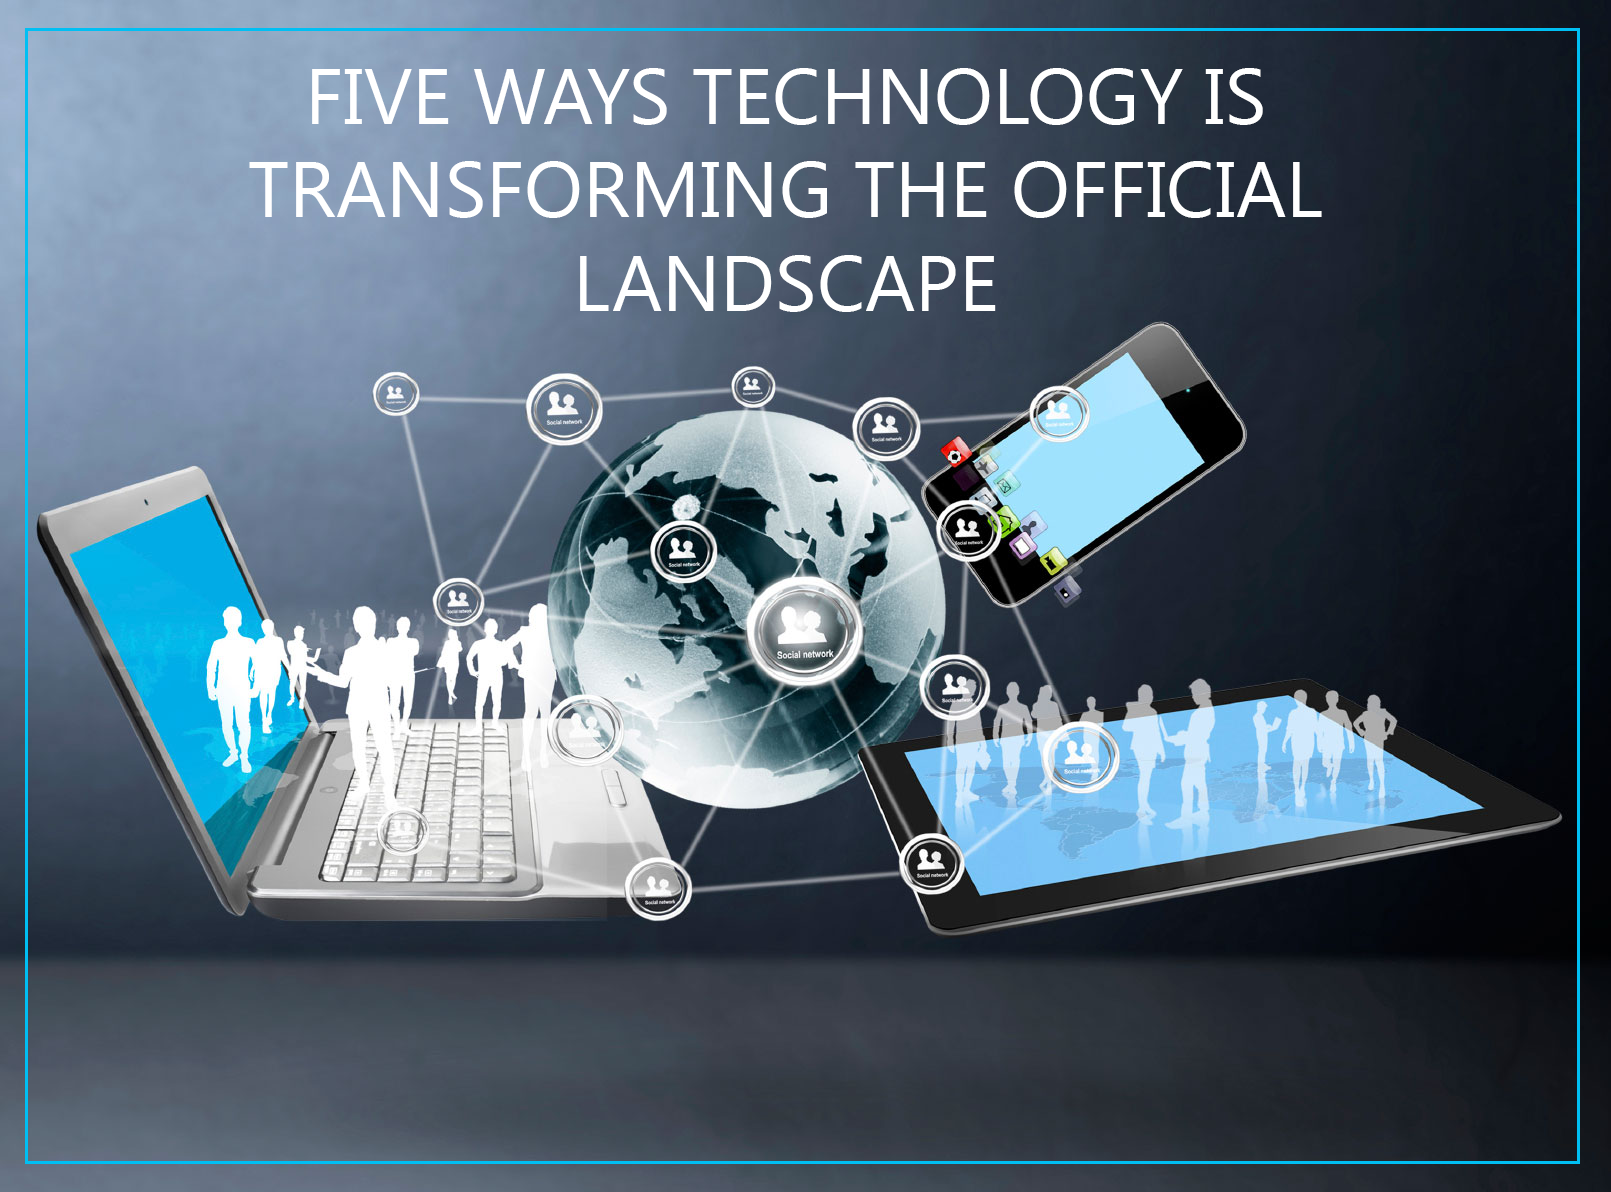 Five Ways Technology is Transforming the Official Landscape